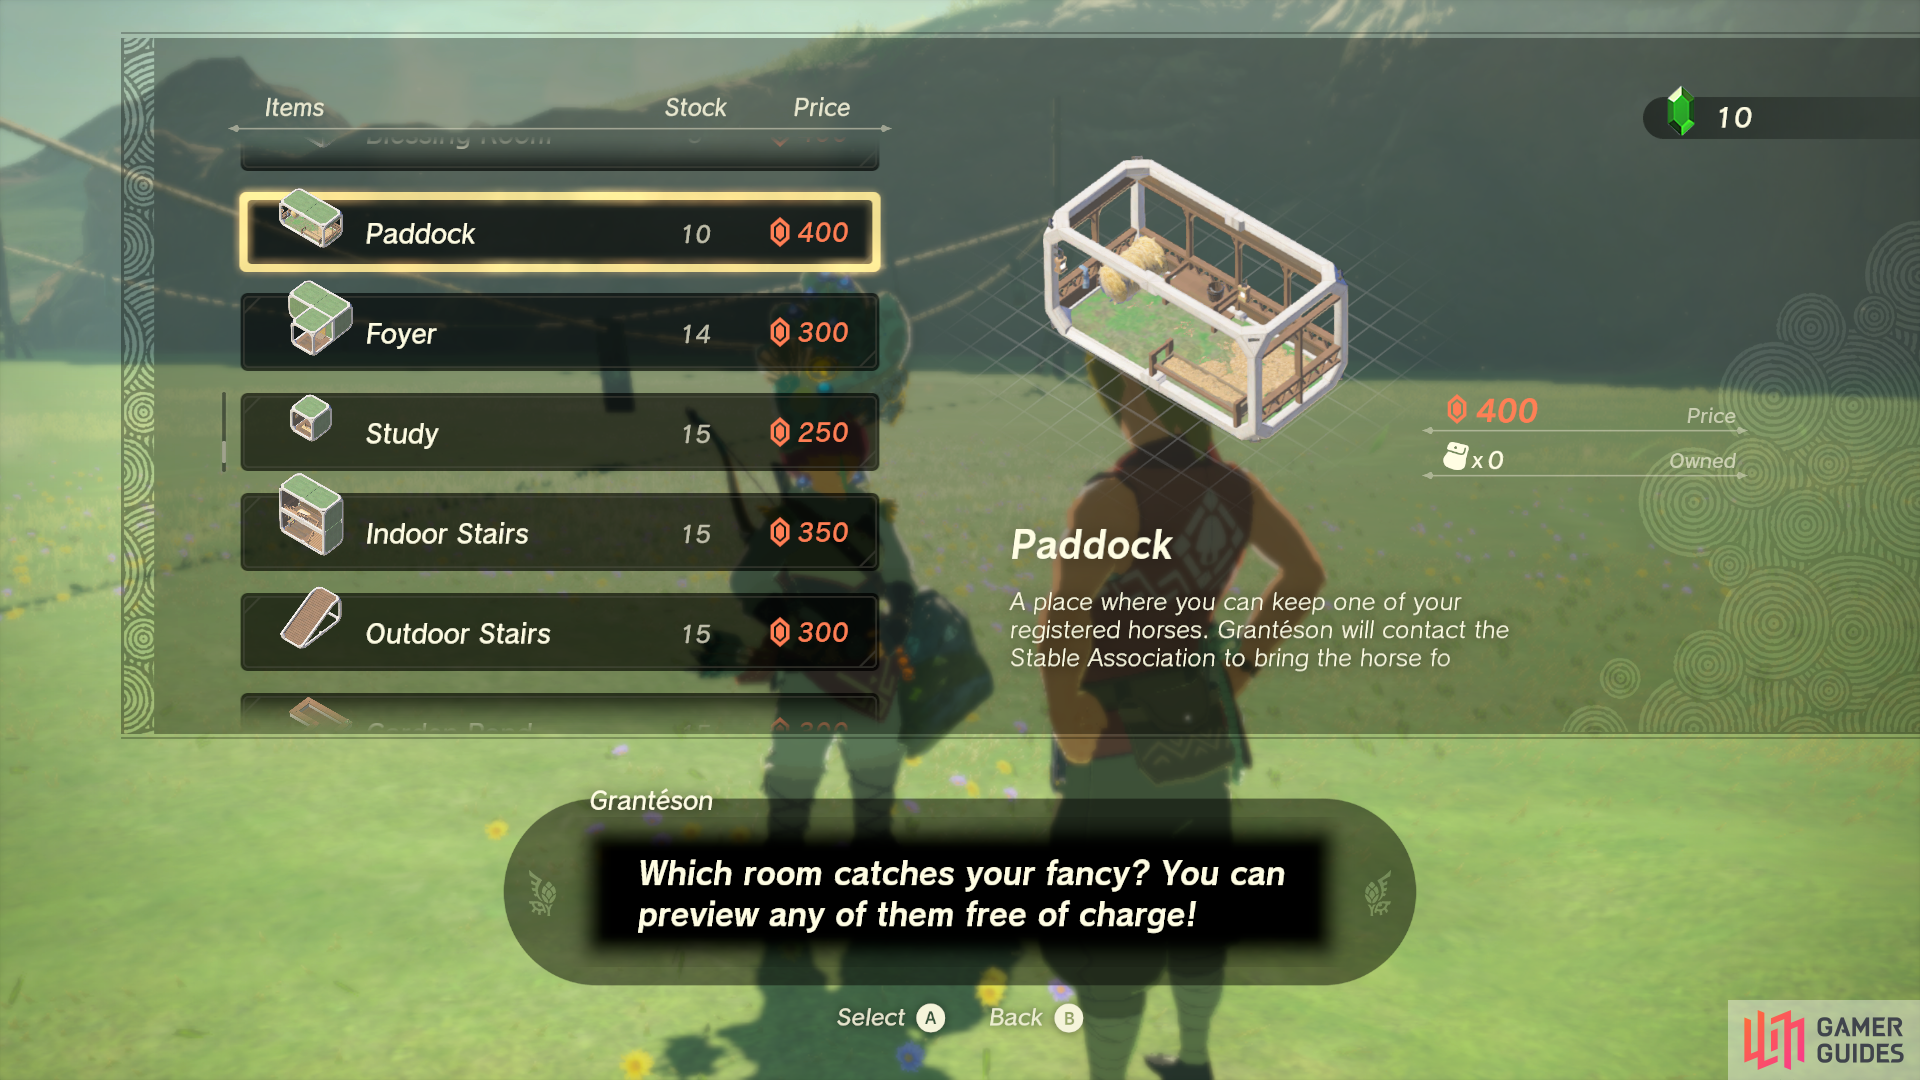 Buying rooms for Link’s house in Tears of The Kingdom.